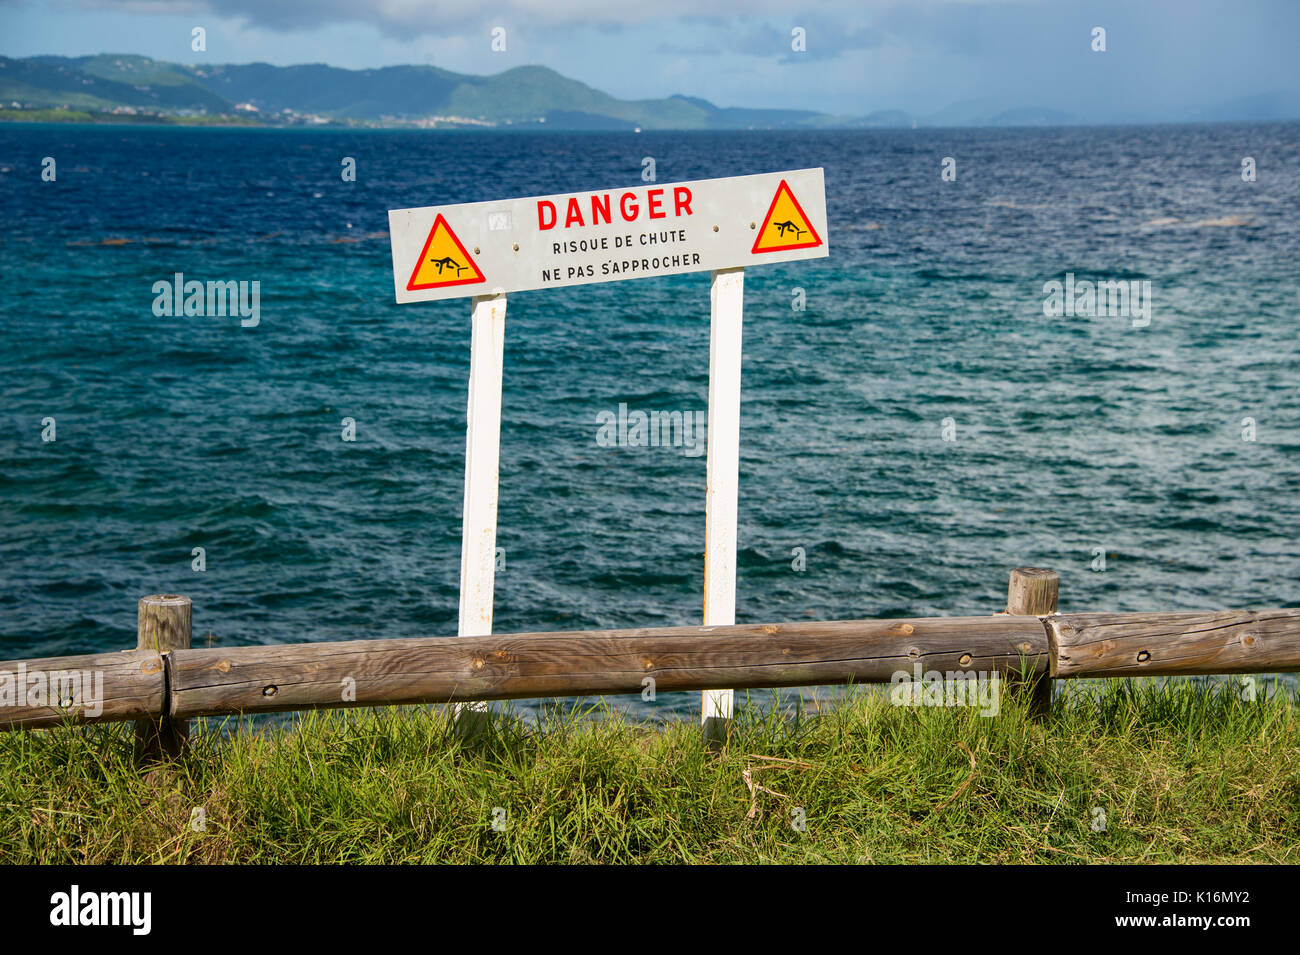 French sign warning people to keep away from a dangerous cliff edge in Martinique (Do not approach, risk of falling) Stock Photo